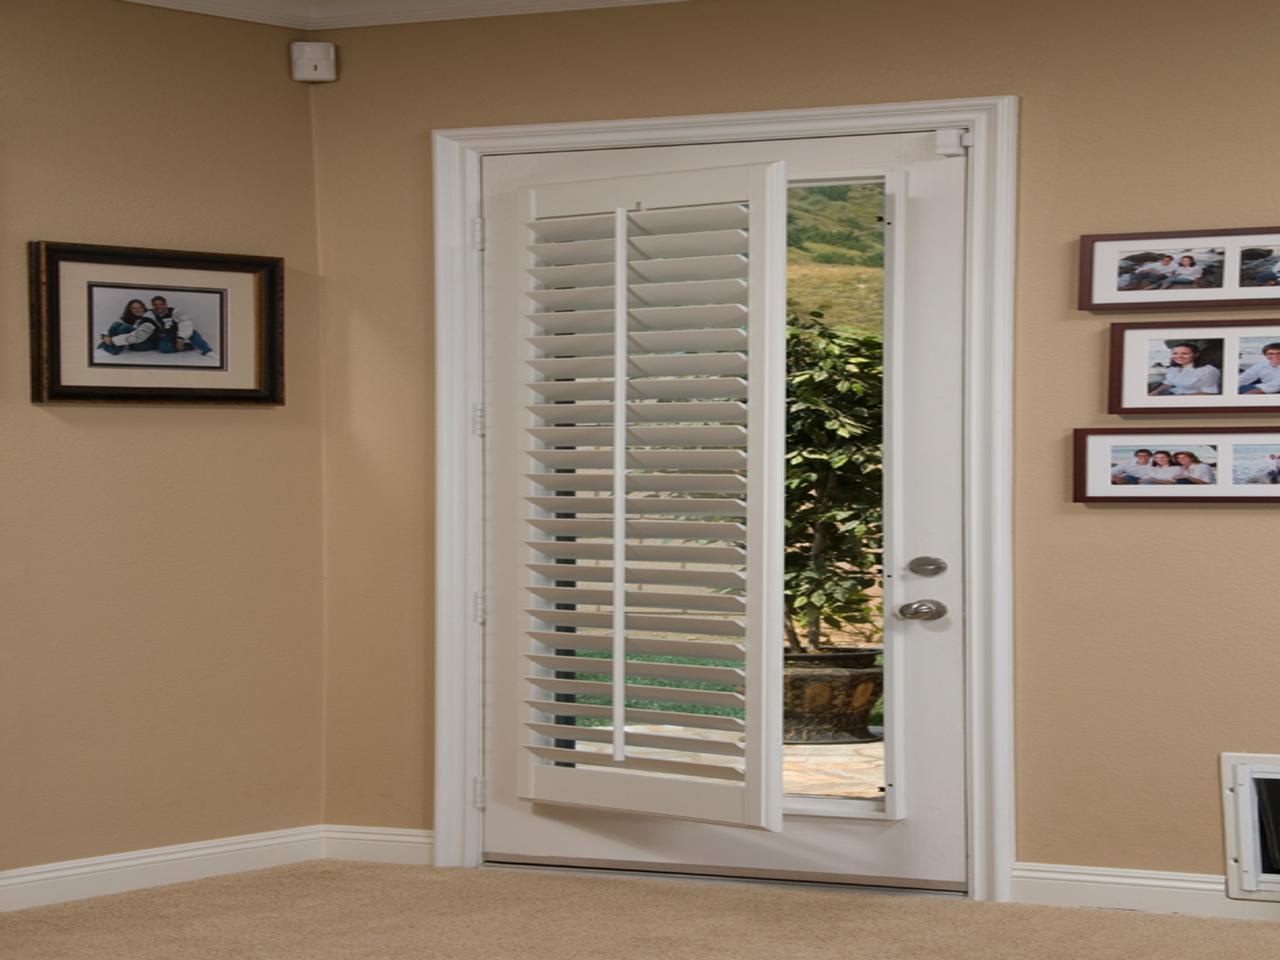 French door with interior shutters away from the window